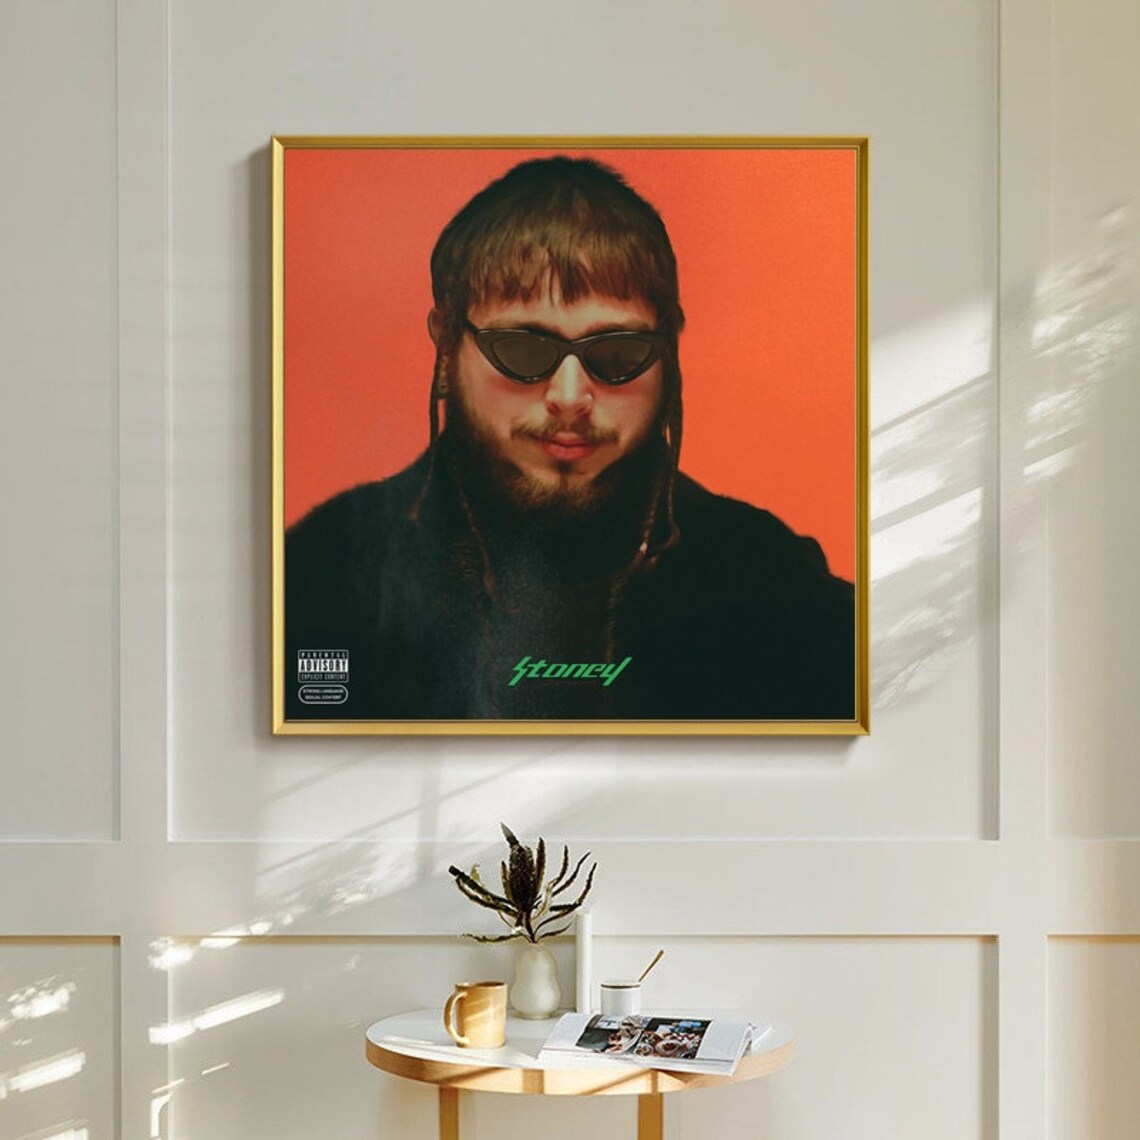 Post Malone Next Music Album cover Canvas Poster Unframe Etsy